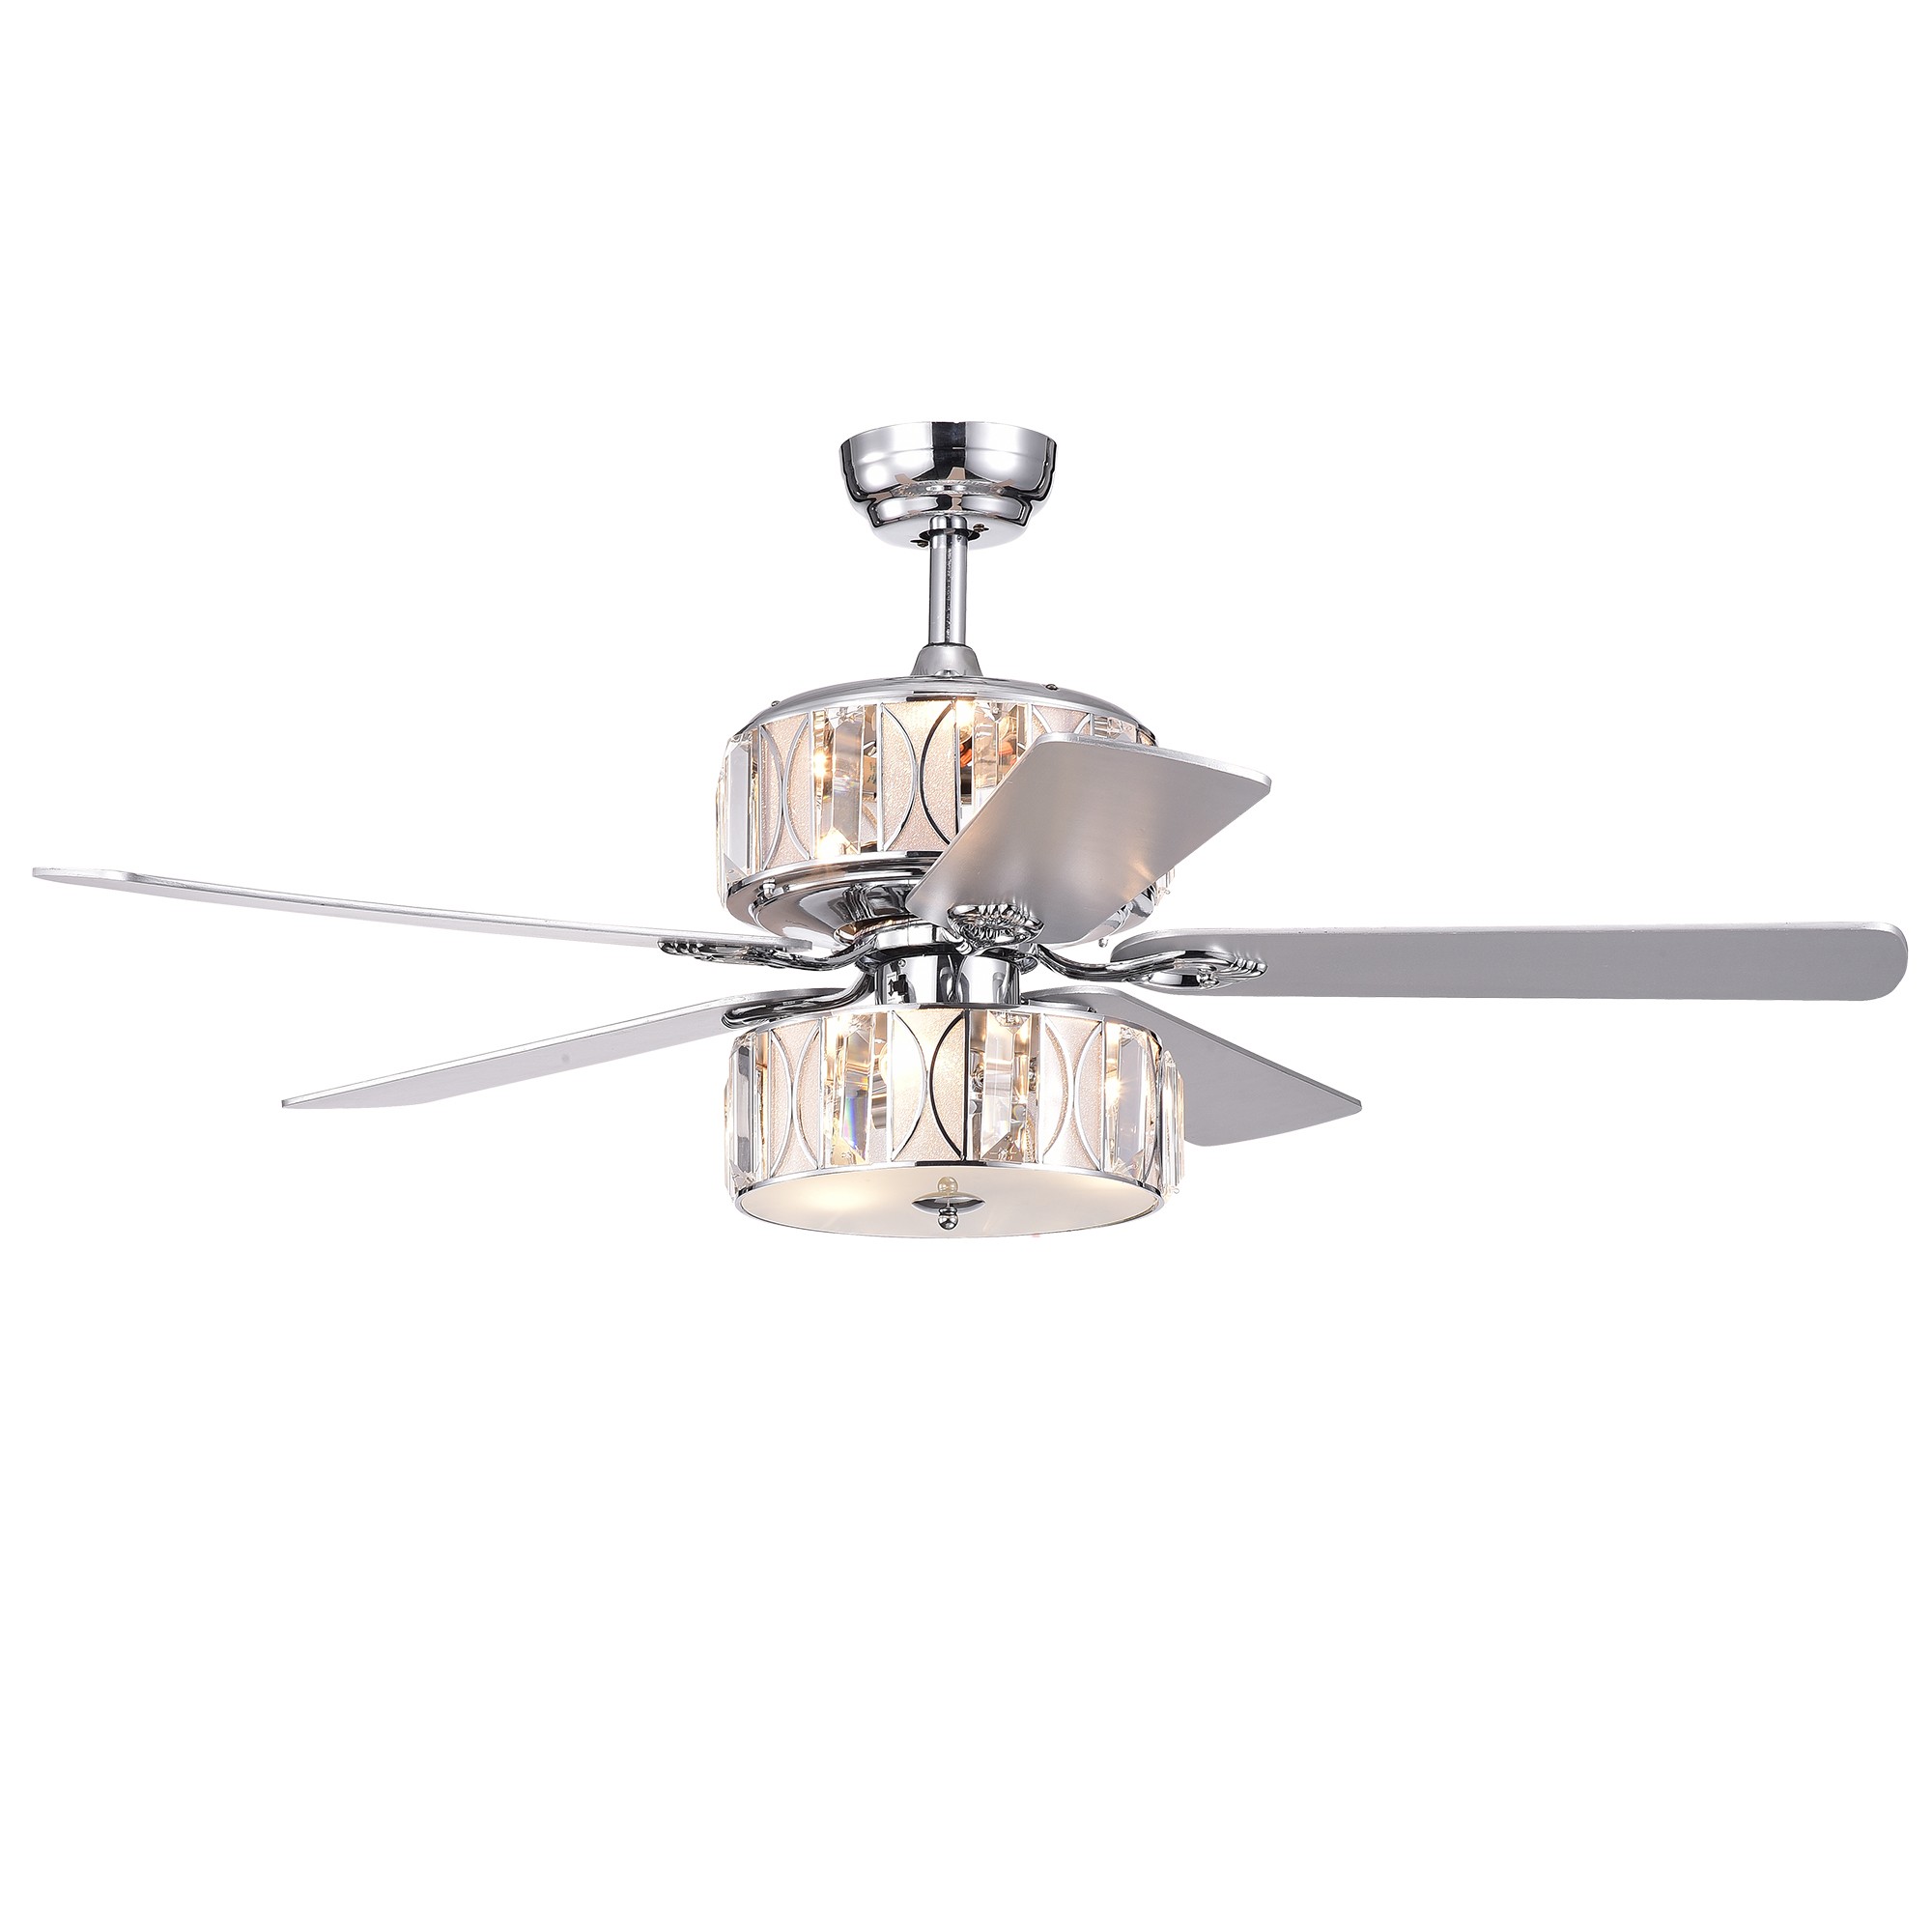 Spera 5-blade 52-inch Chrome Lighted Ceiling Fans with Crystal Drum Shade (remote controlled